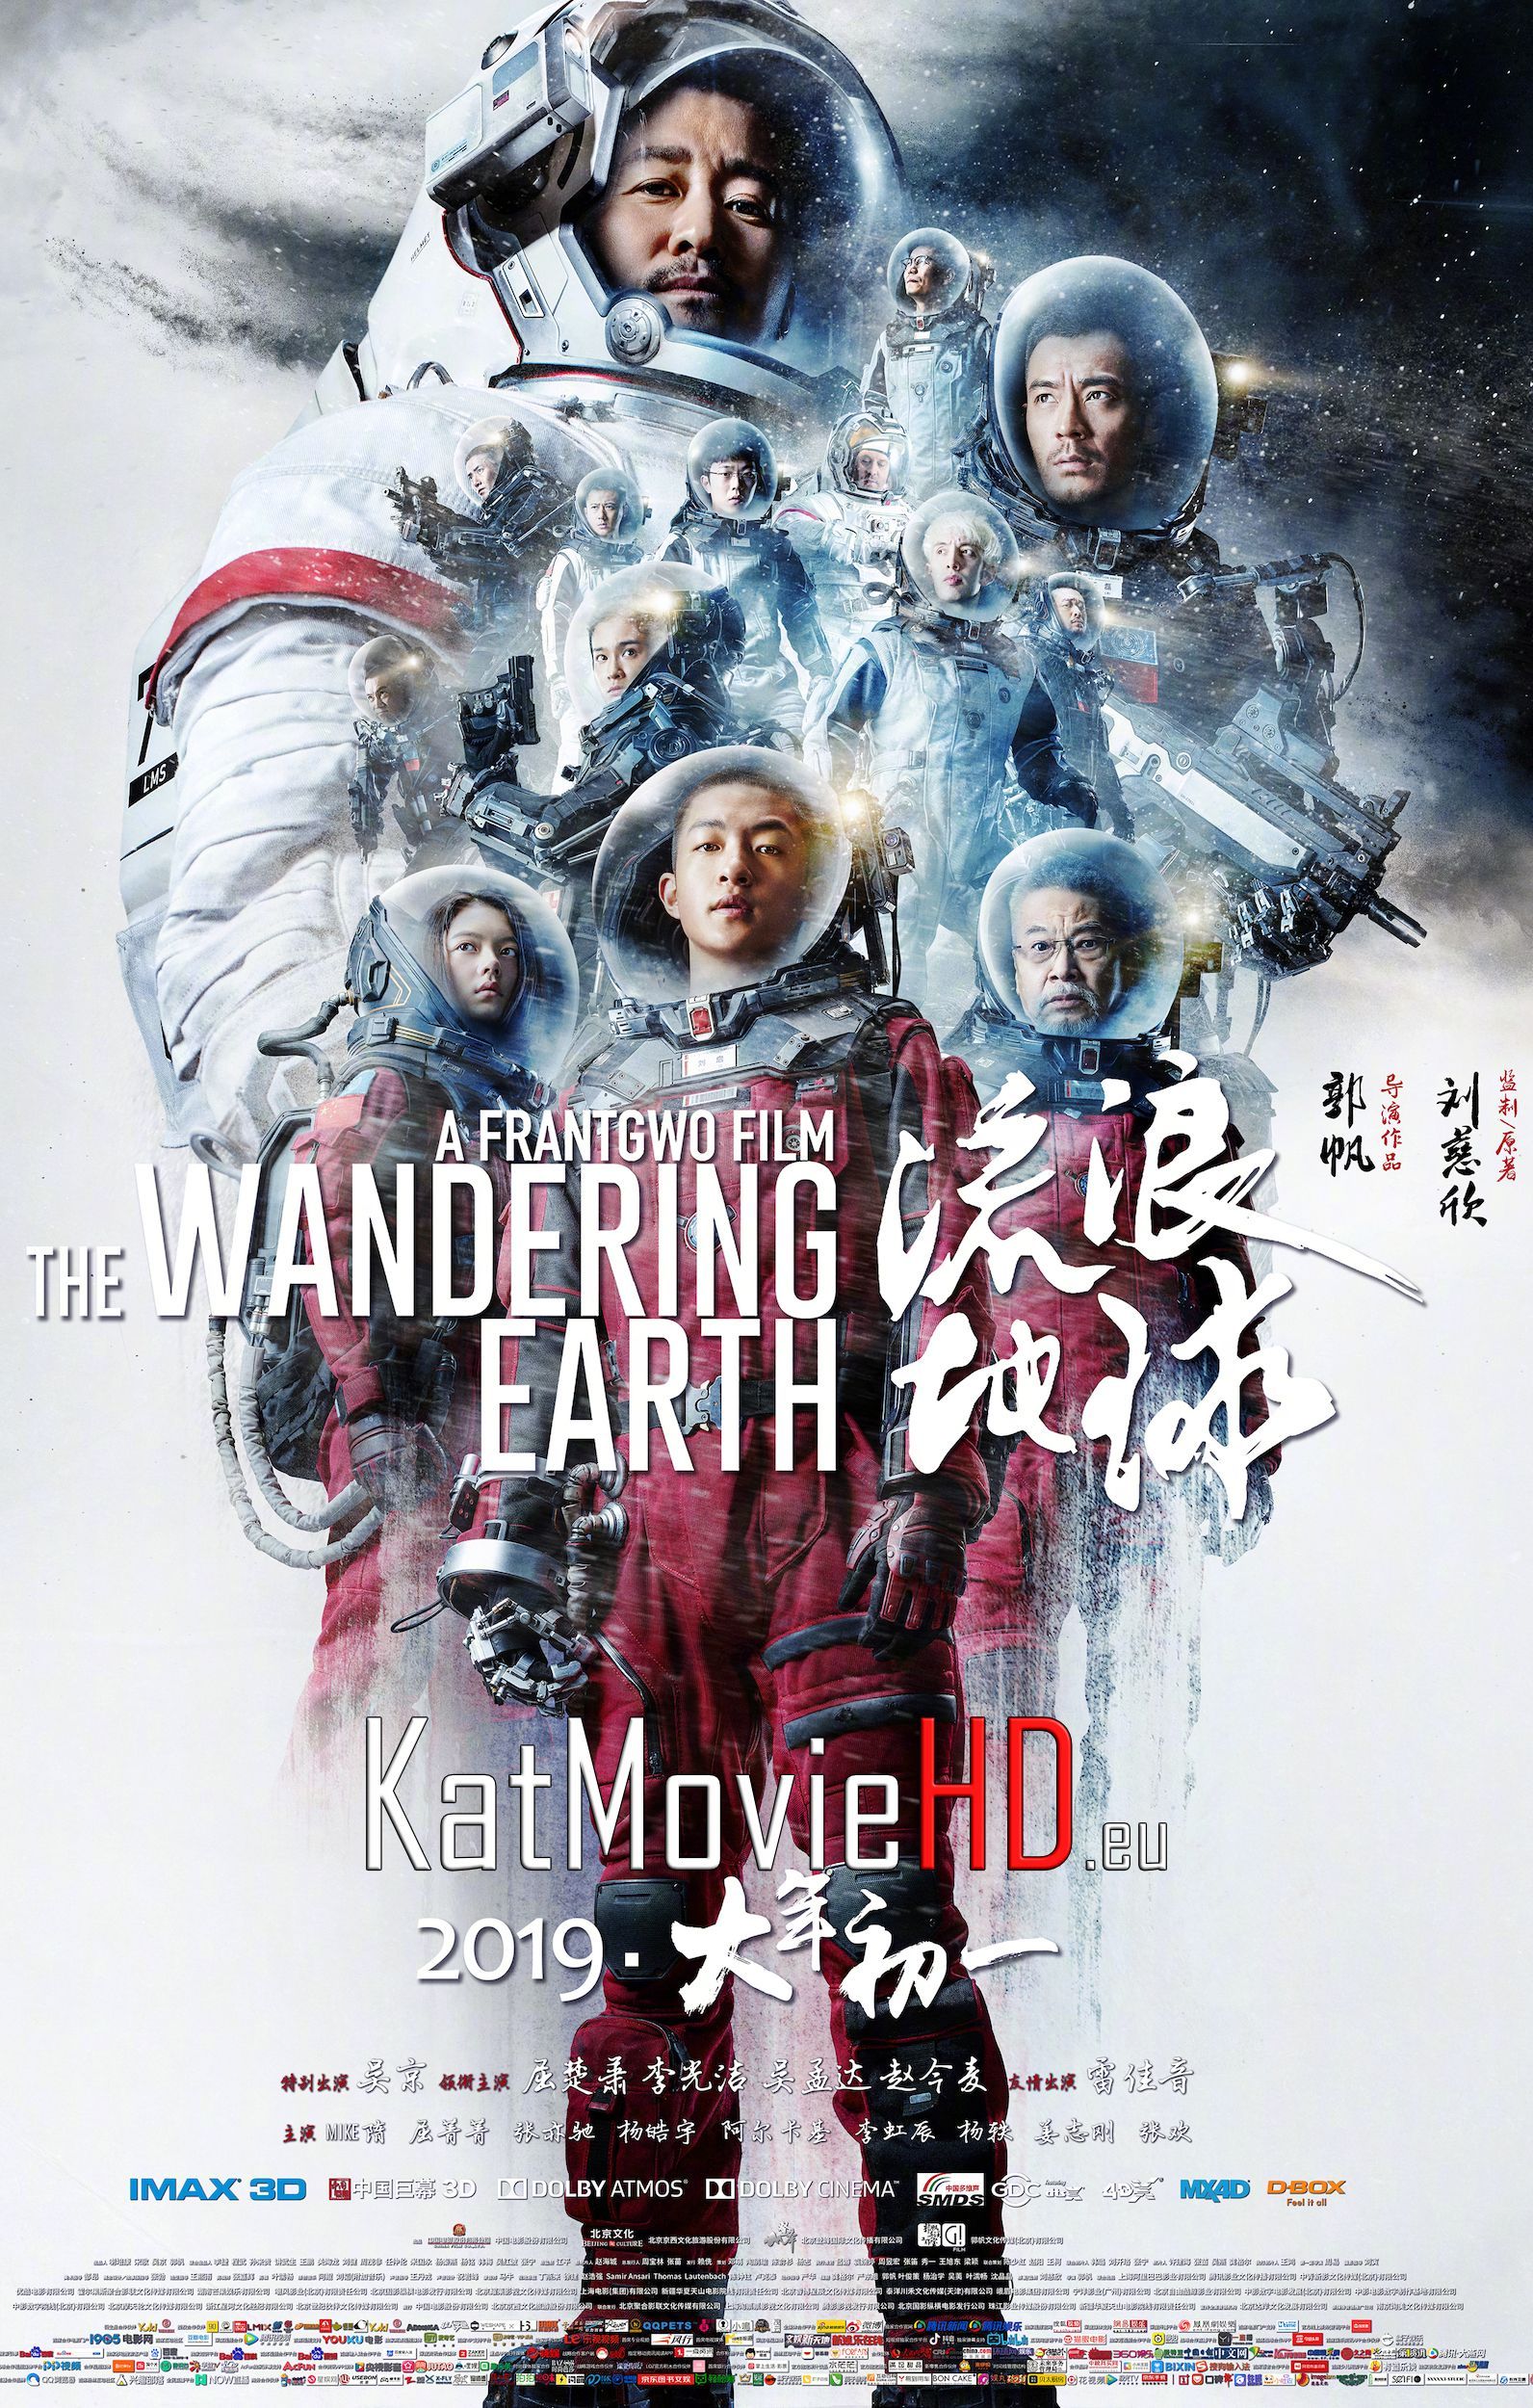 The Wandering Earth (2019) Dual Audio English Dubbed + Hindi Subbed. Earth movie, Earth film, Download movies